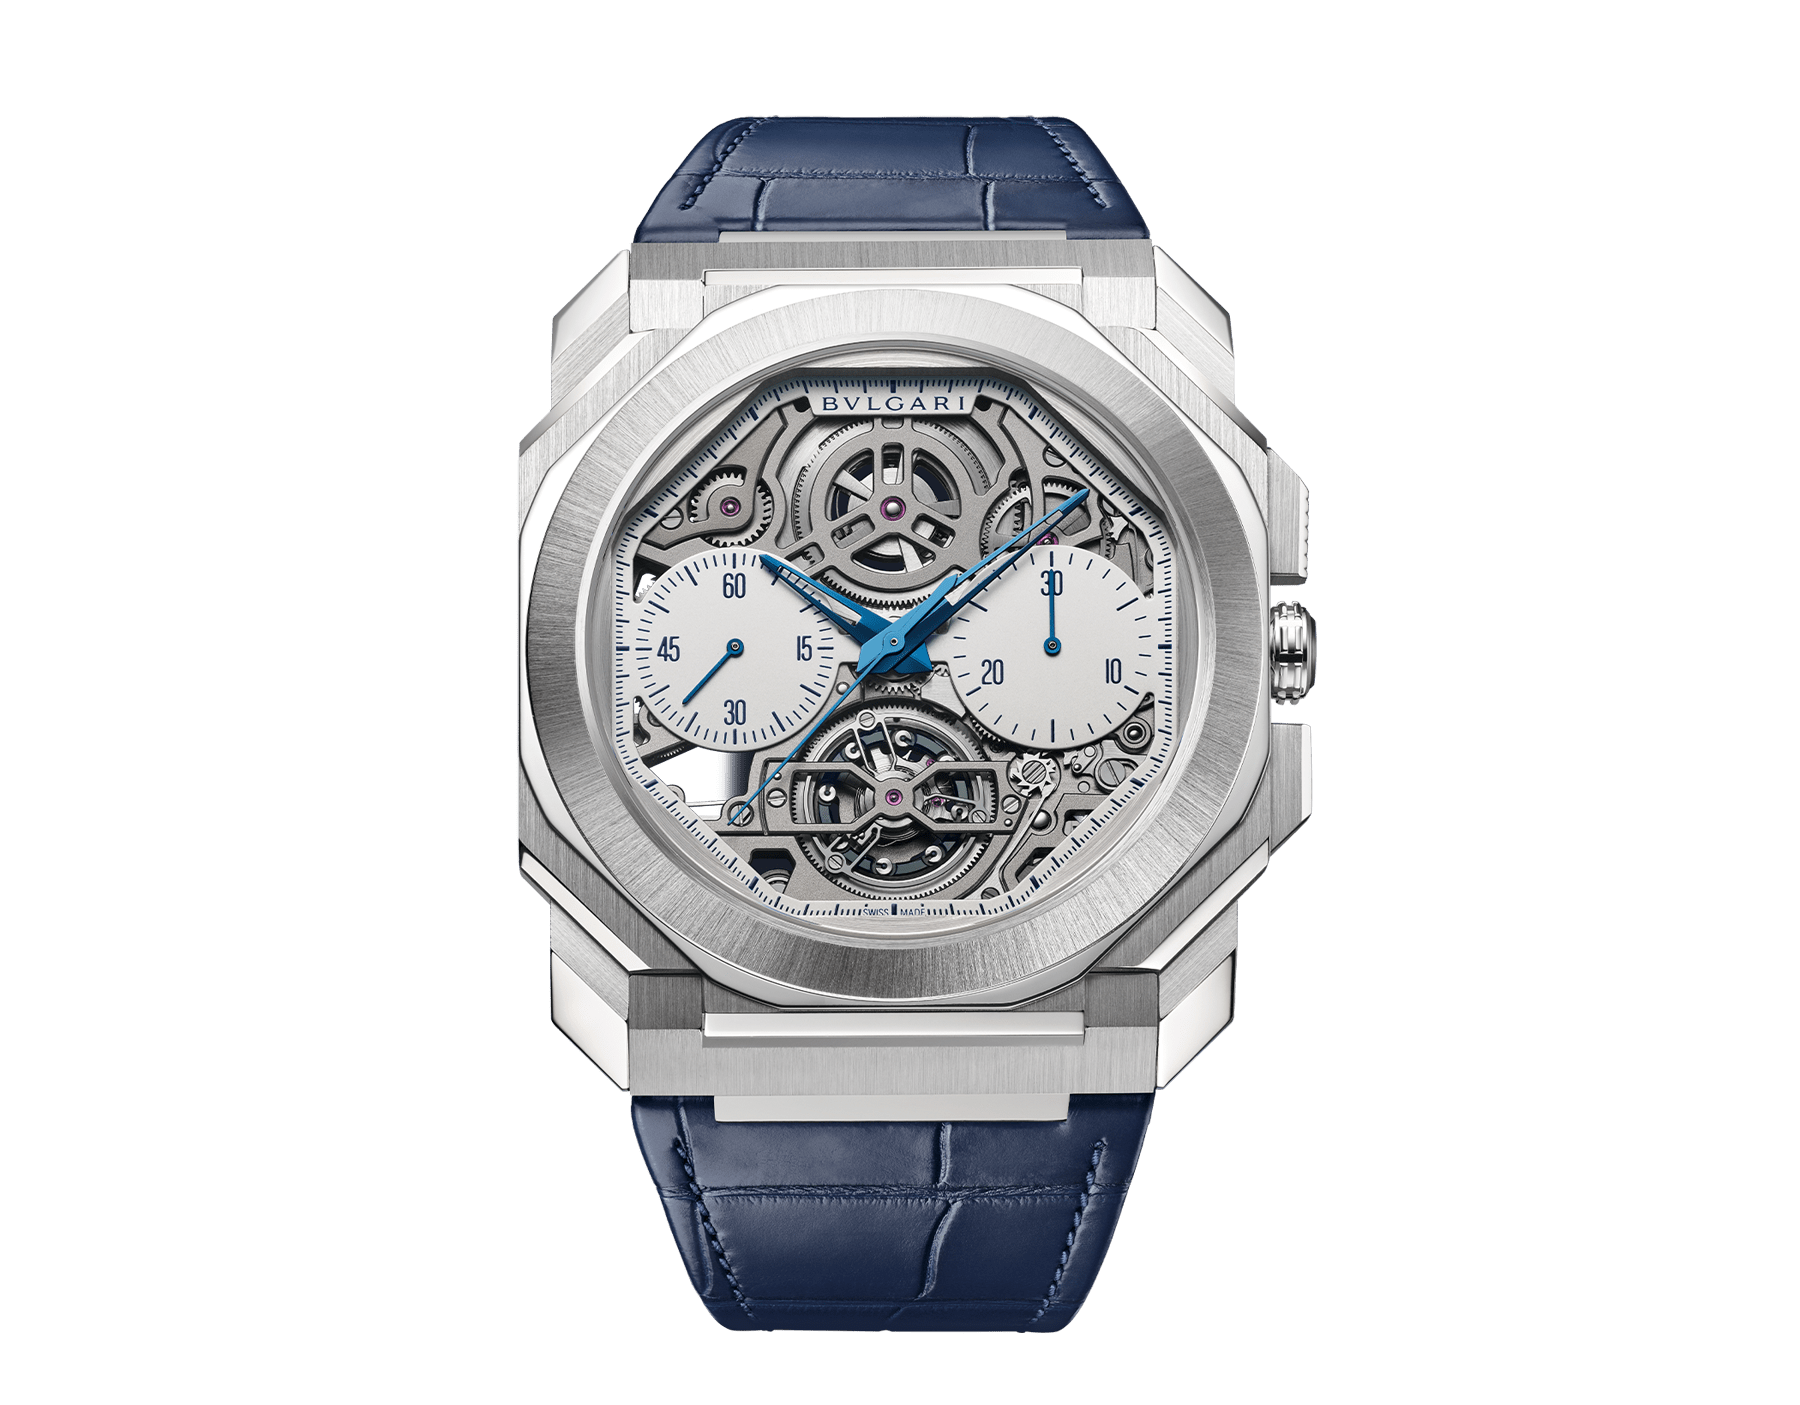 Octo Finissimo Tourbillon Skeleton Chronograph watch with mechanical manufacture ultra-thin movement (3.50 mm thick), automatic winding, single-push chronograph and tourbillon, 43 mm platinum case, openwork dial with gray chronograph counters and blue alligator bracelet. Water-resistant up to 30 meters. Limited edition of 30 pieces. 103510 image 1